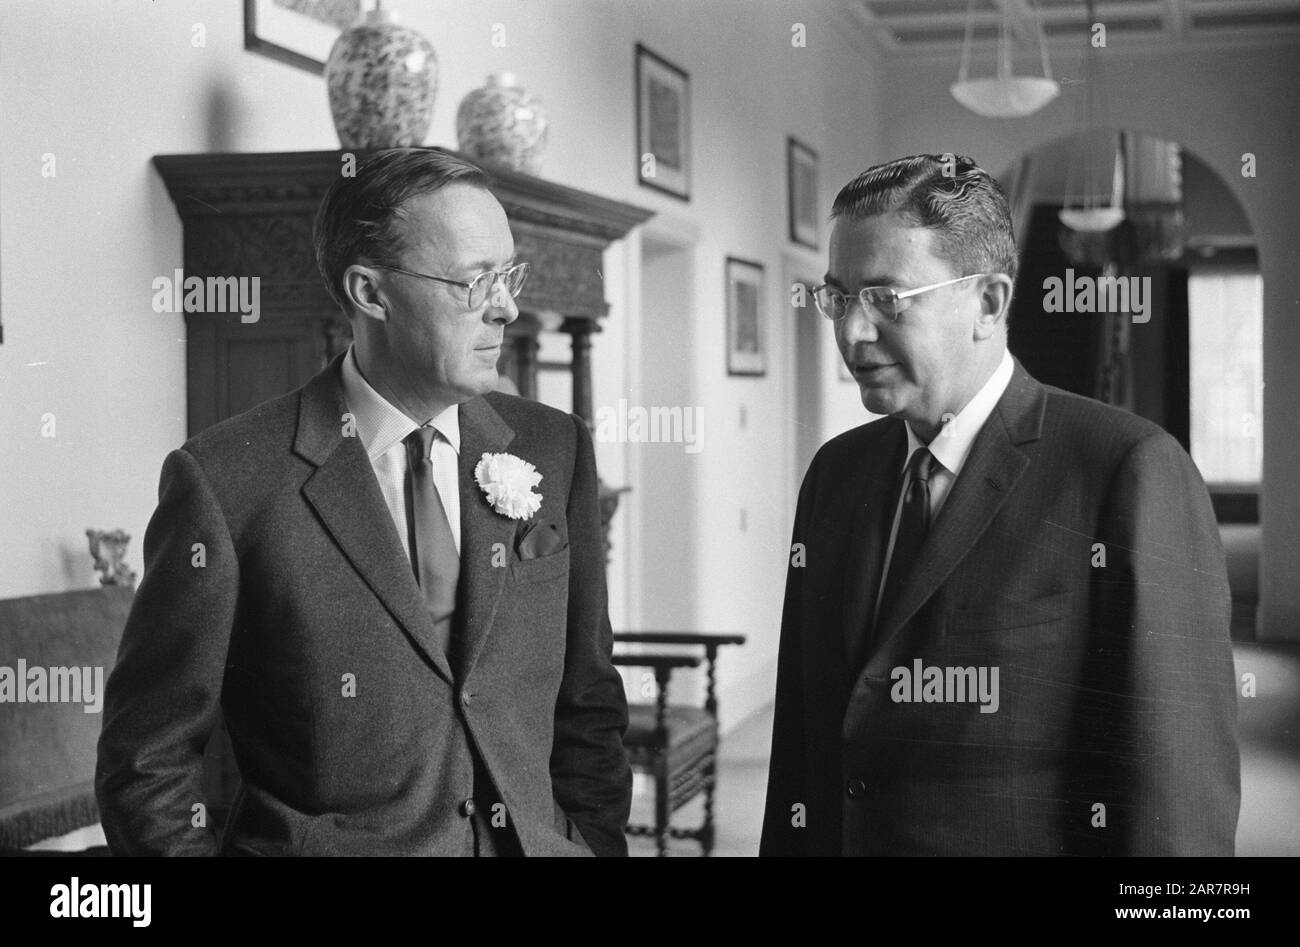 Prince Bernhard receives the governor of the U.S. state of Georgia, Ernest Vandiver Date: March 30, 1962 Keywords: governors, receipts Personal name: Bernhard (prince Netherlands), Vandiver, S.E. Stock Photo